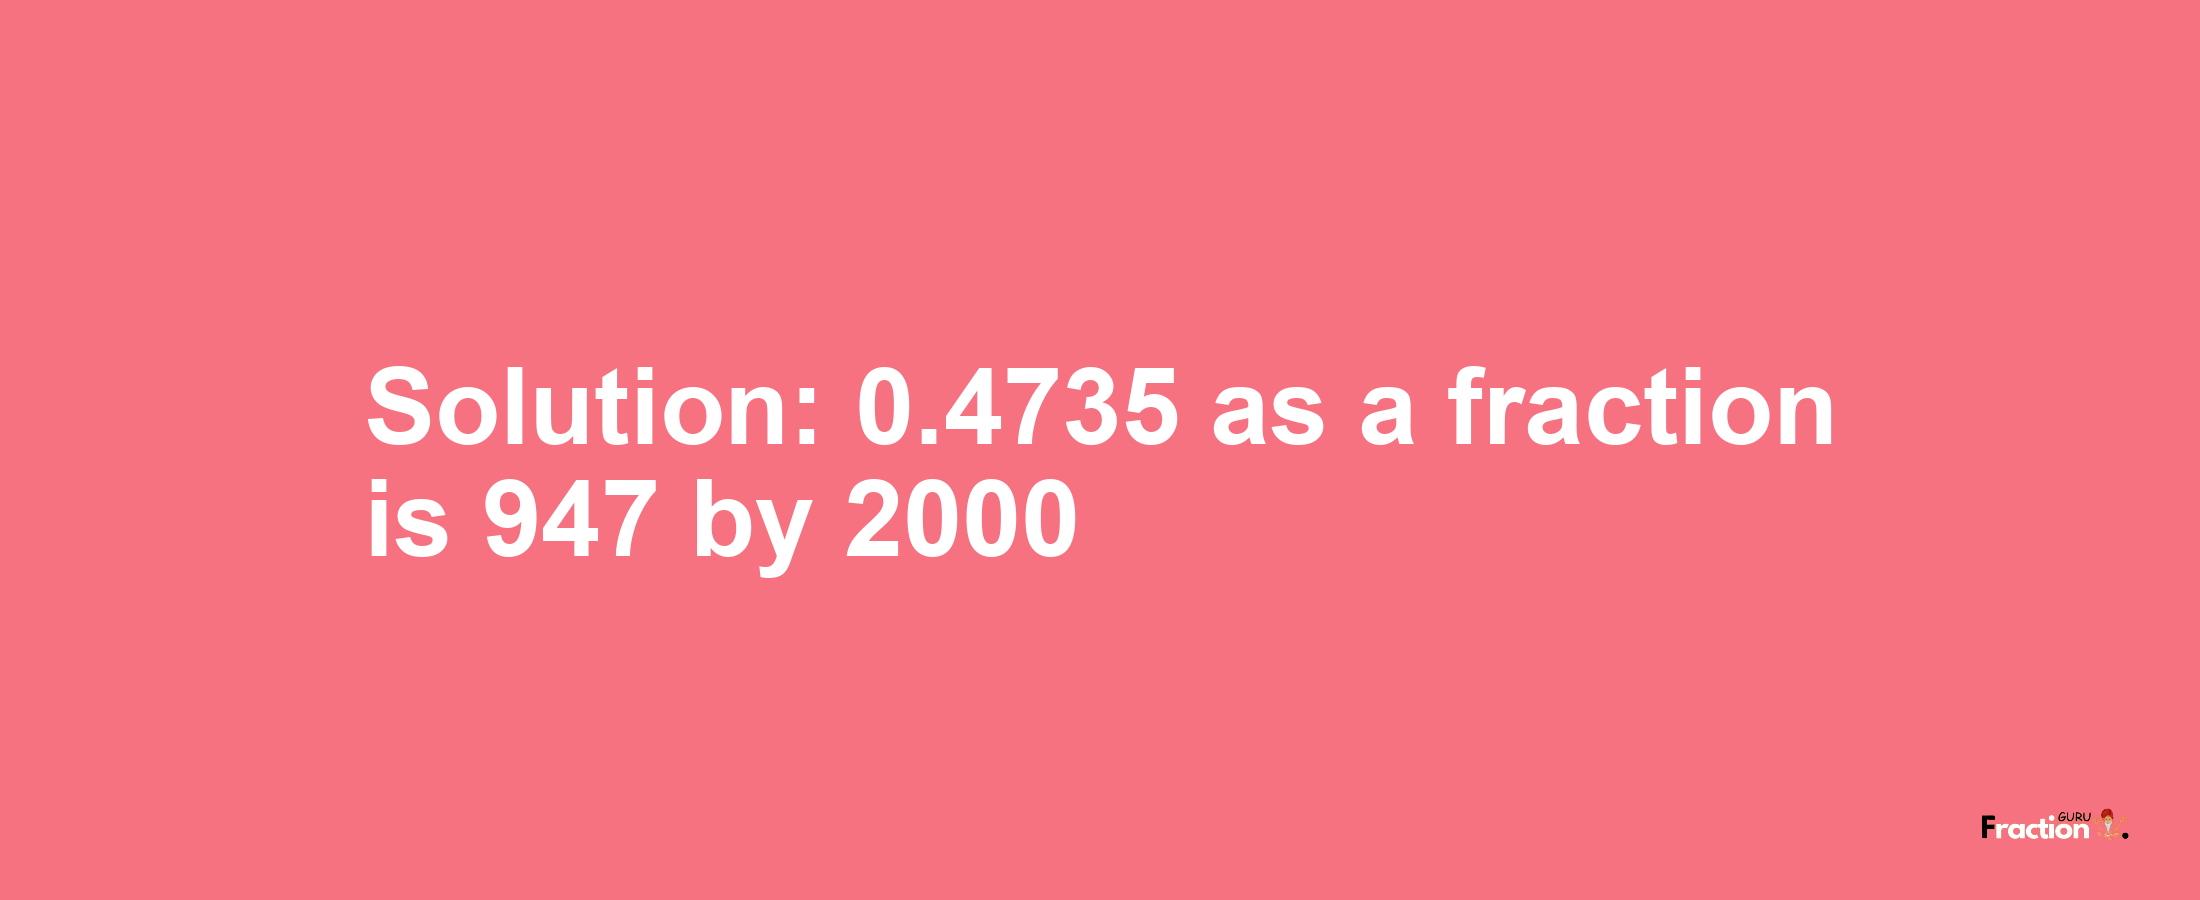 Solution:0.4735 as a fraction is 947/2000